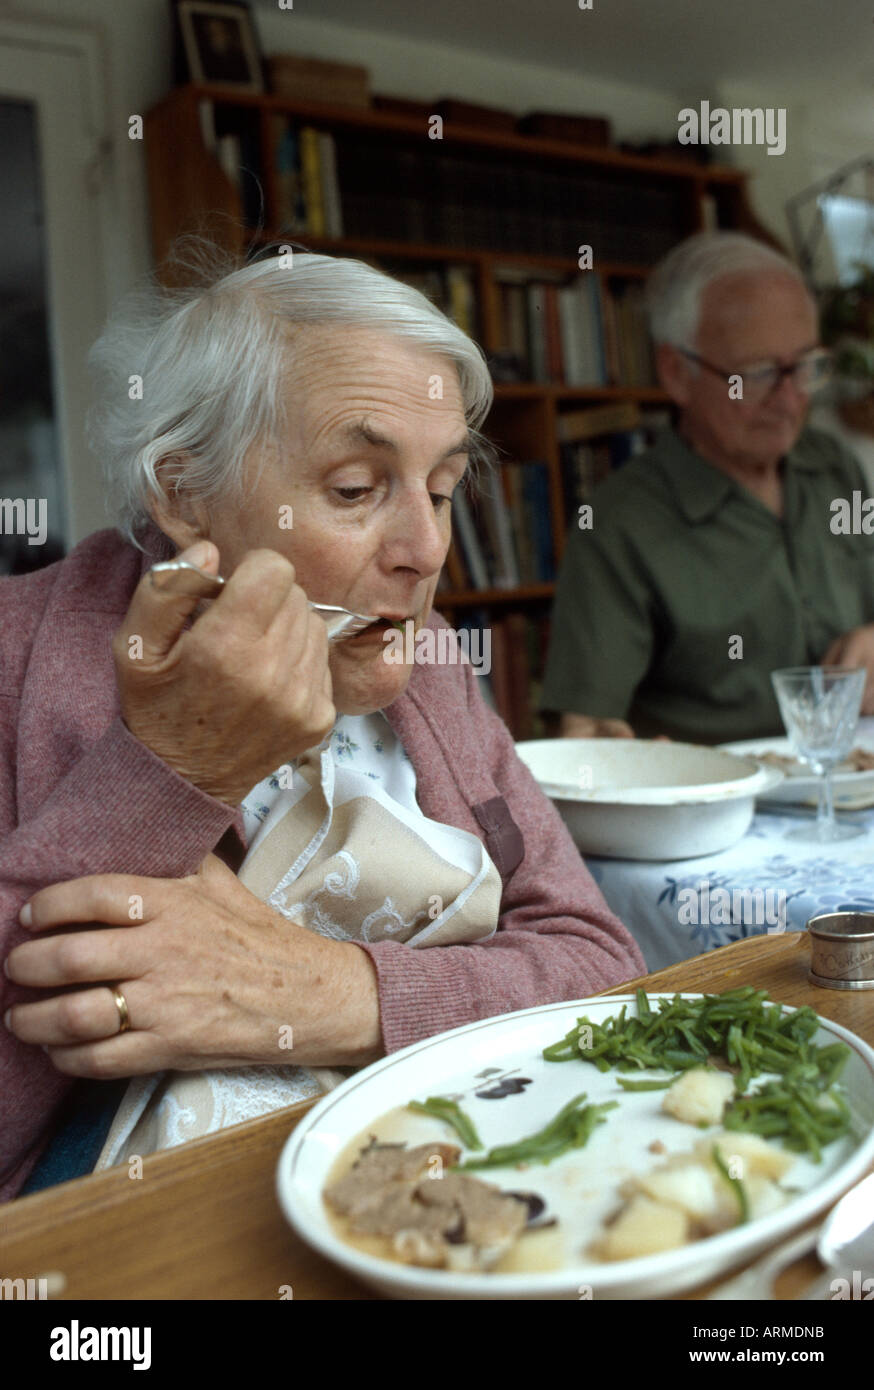 woman suffering with motor neuron disease struggles with her fork as she feeds herself Stock Photo